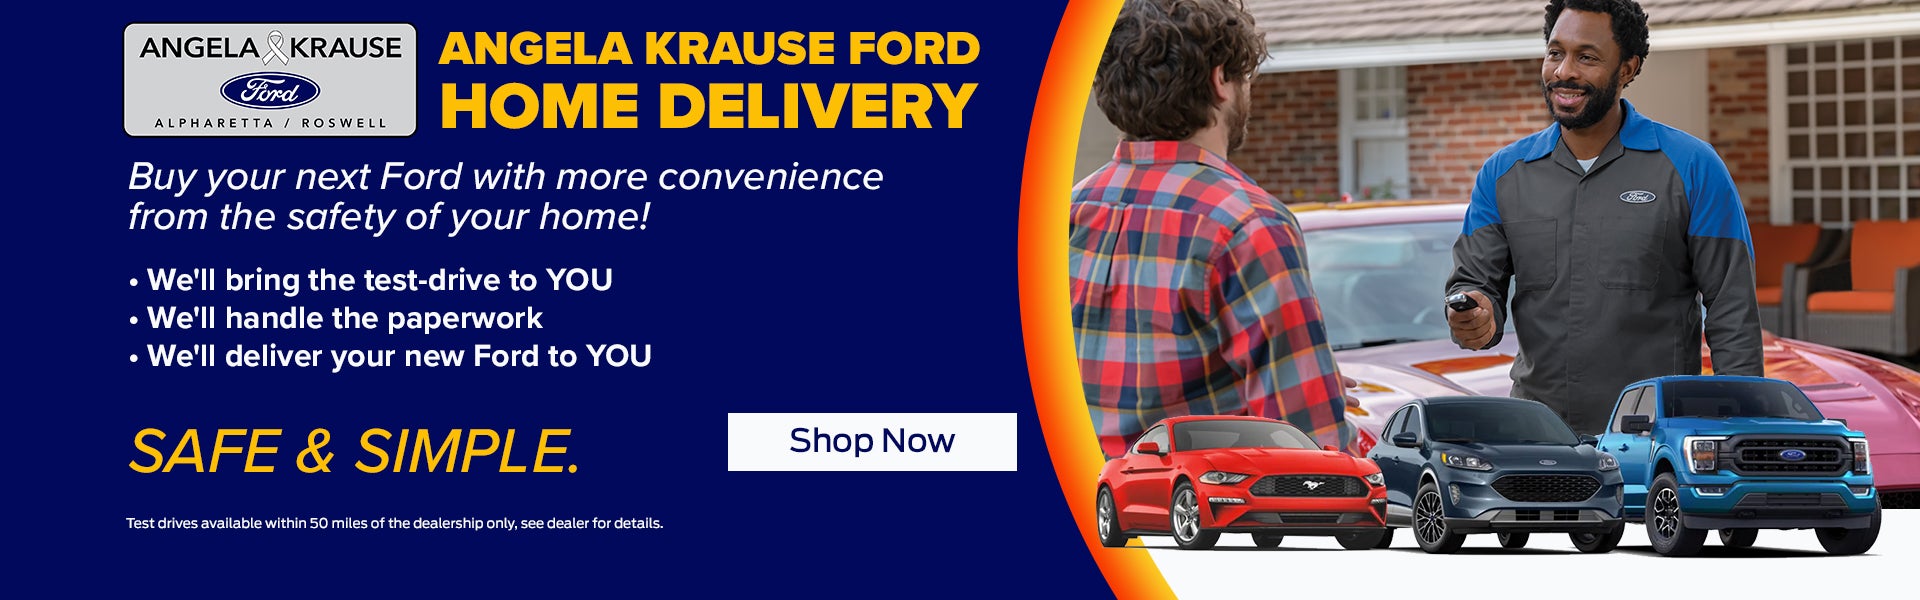 Angela Krause Ford Home Delivery in Alpharetta GA